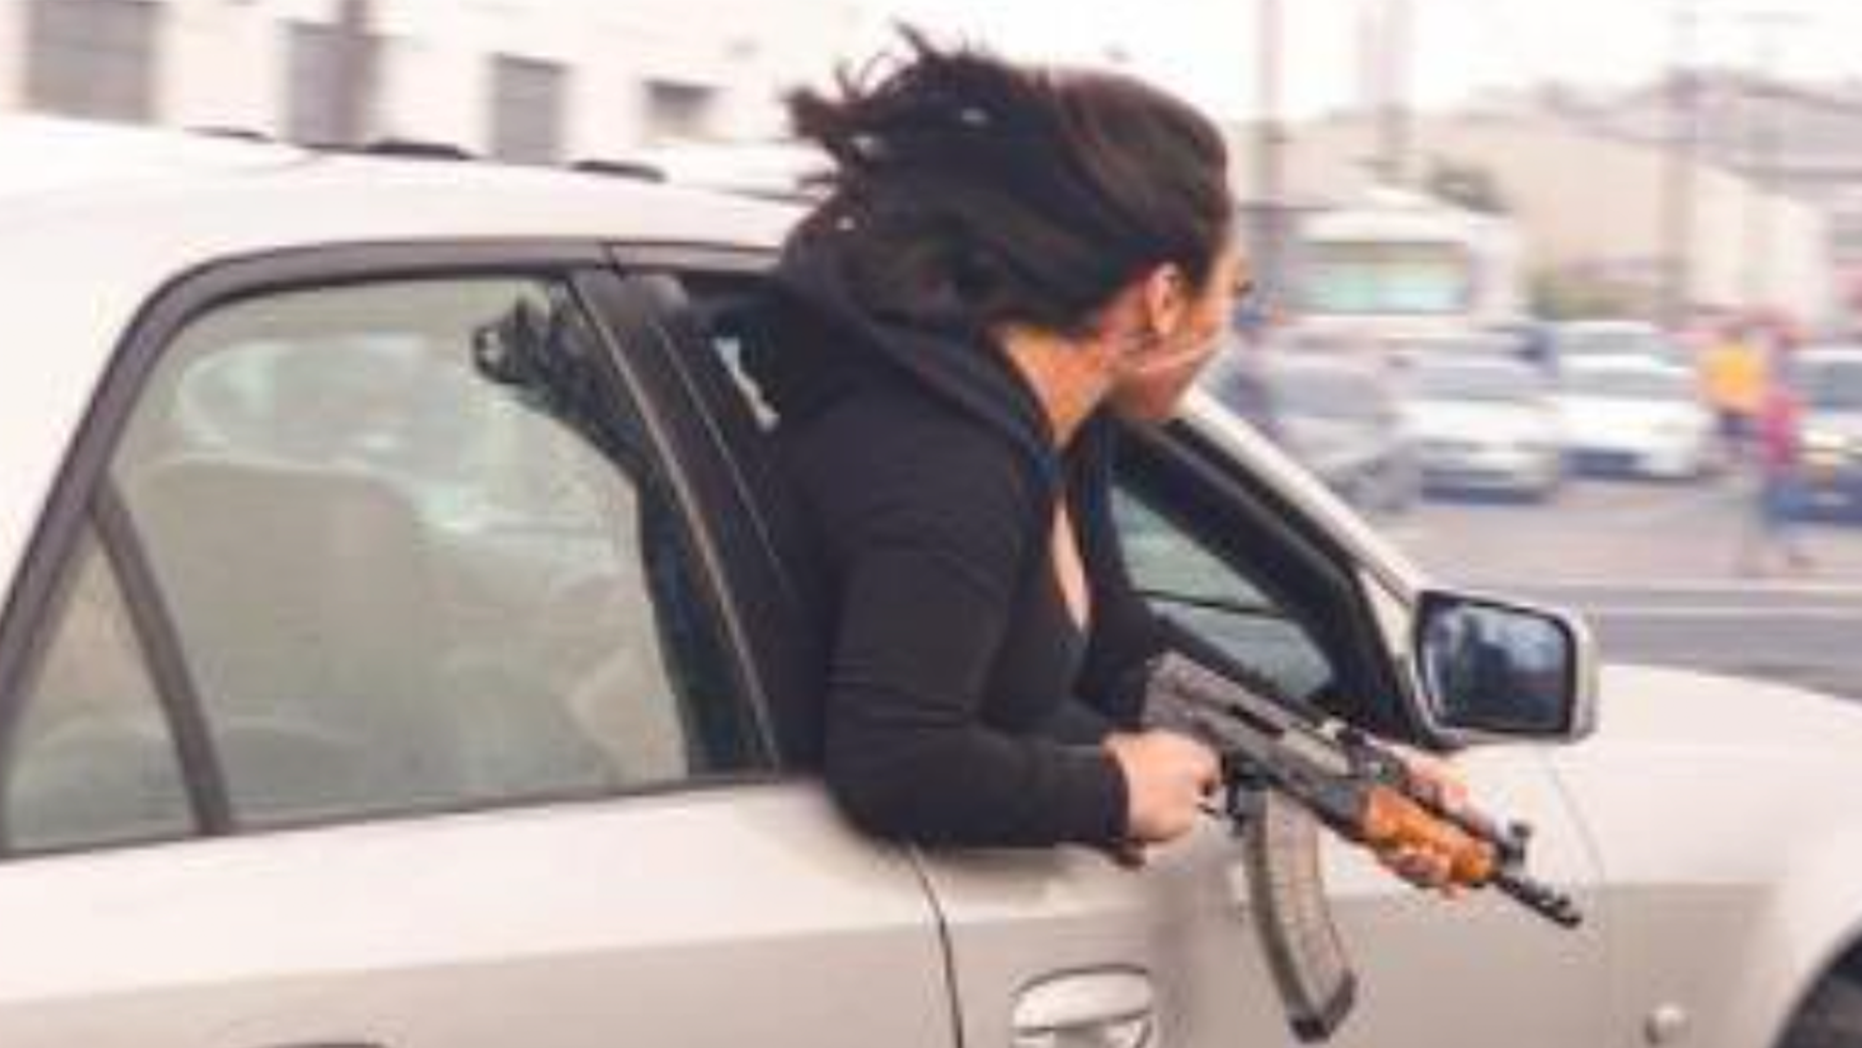 Woman-leans-out-passenger-window-with-AK47-in-San-Francisco.png